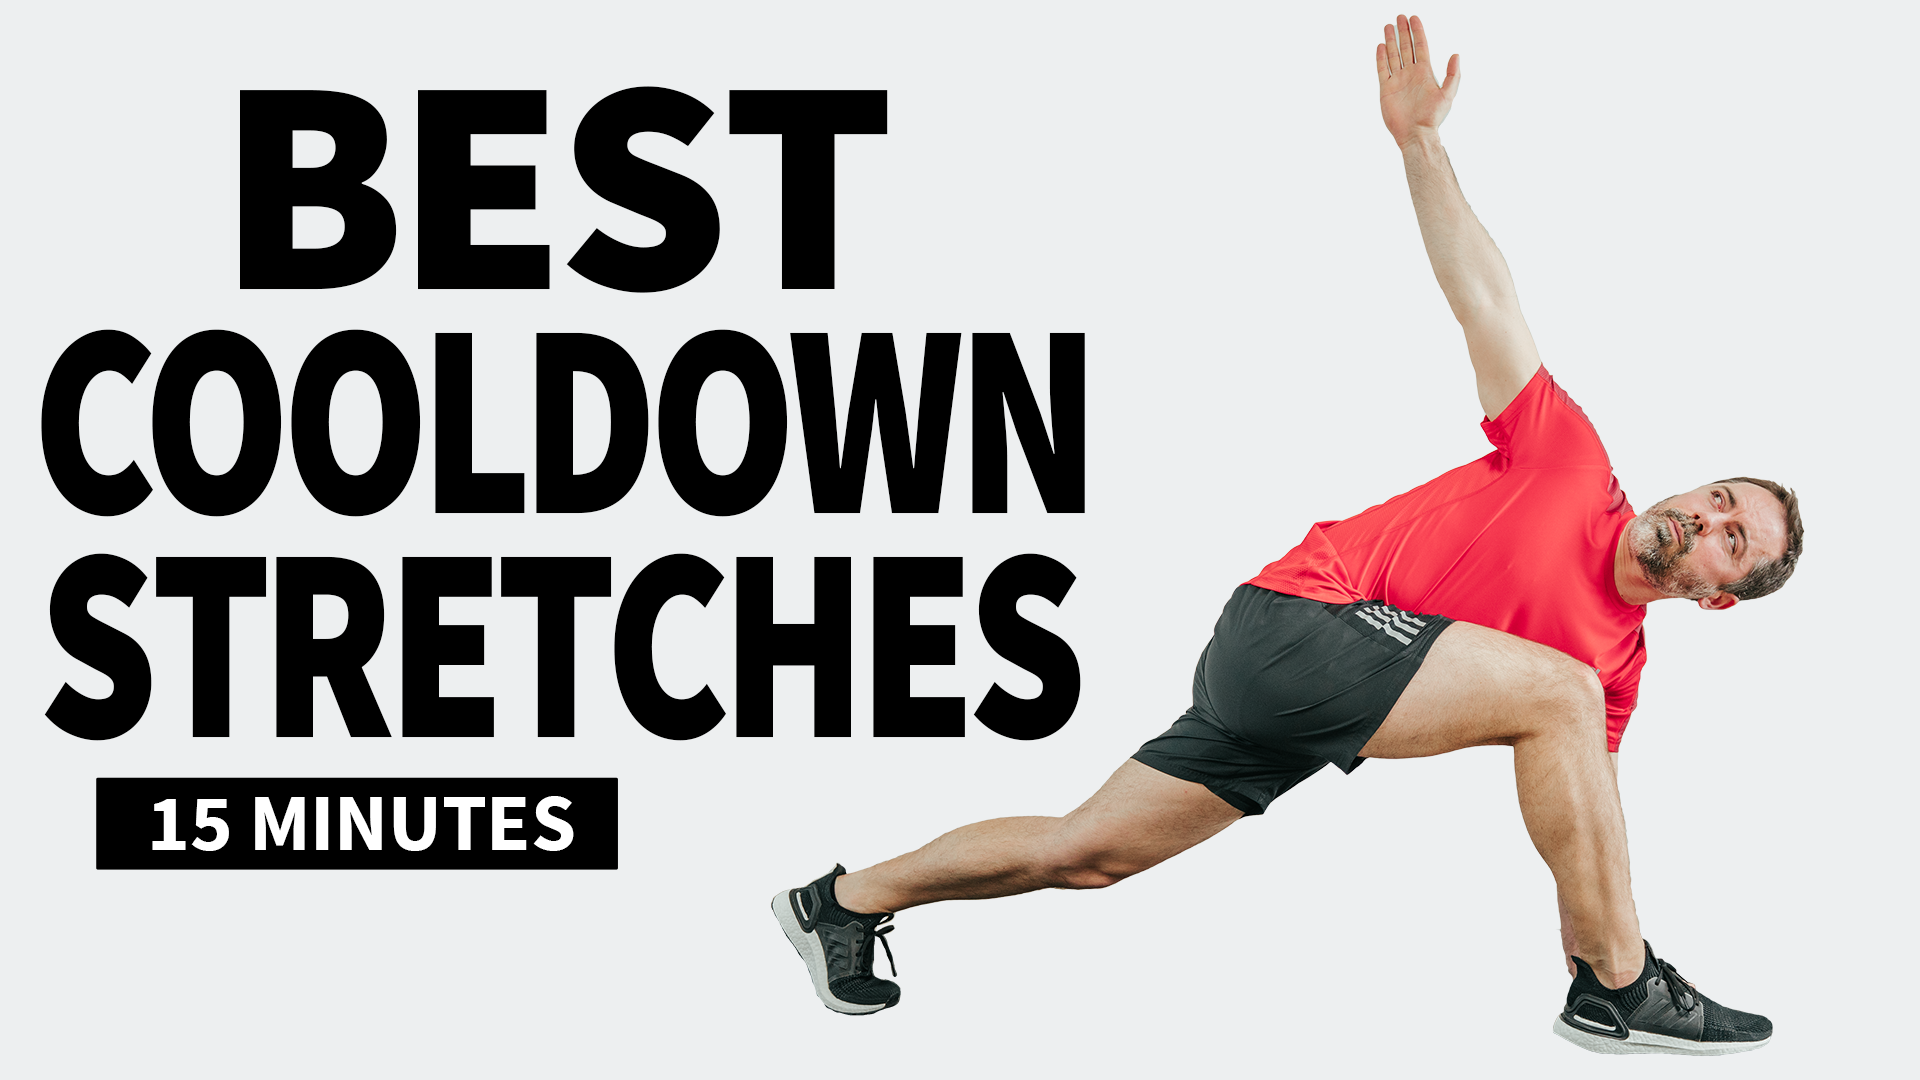 Best Cooldown Stretches After Workout | Muscle Recovery